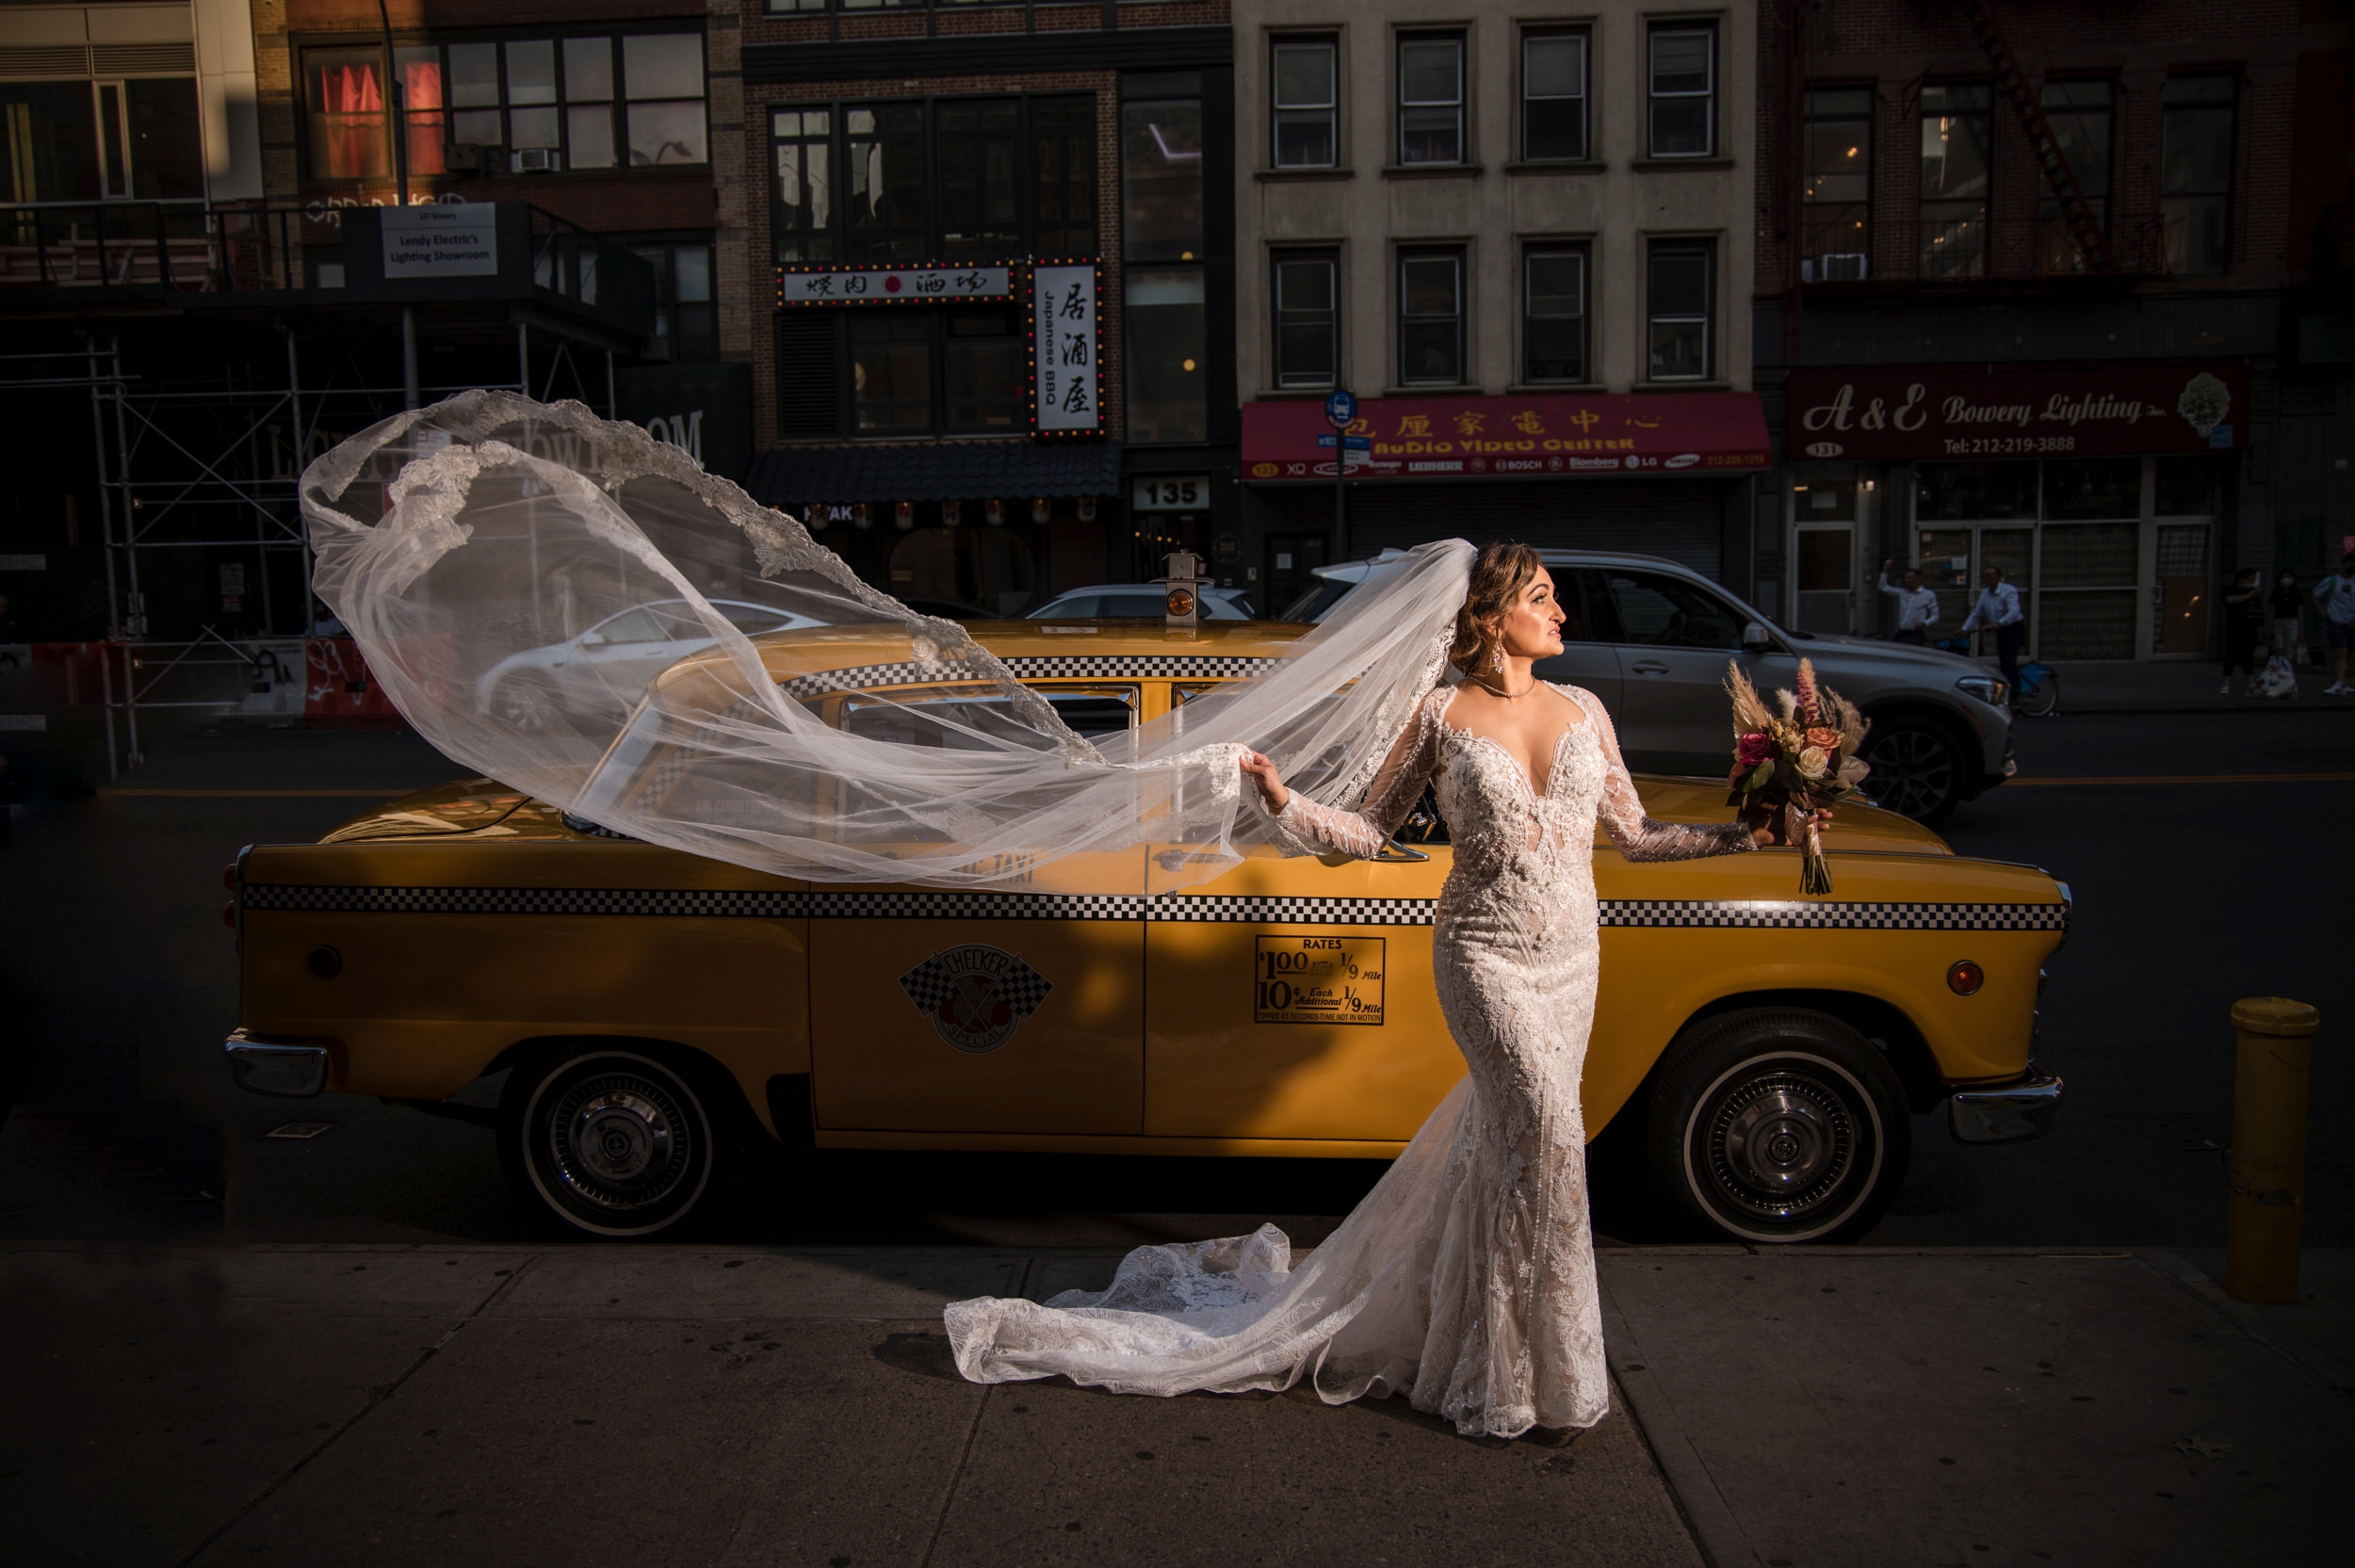 A Capitale bride poses in front of a yellow taxi.